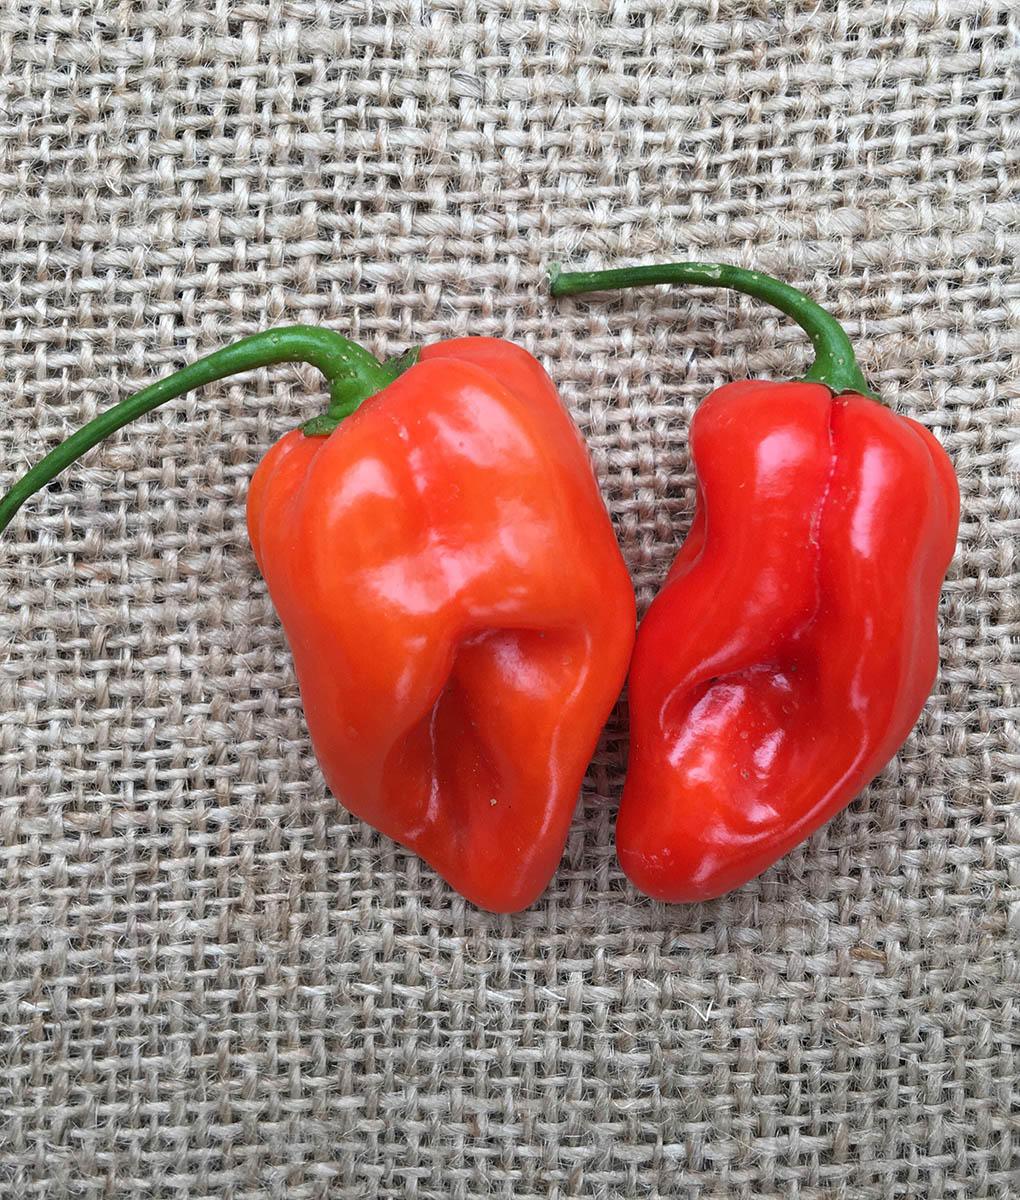 two red peppers with green stems, indentations prominent